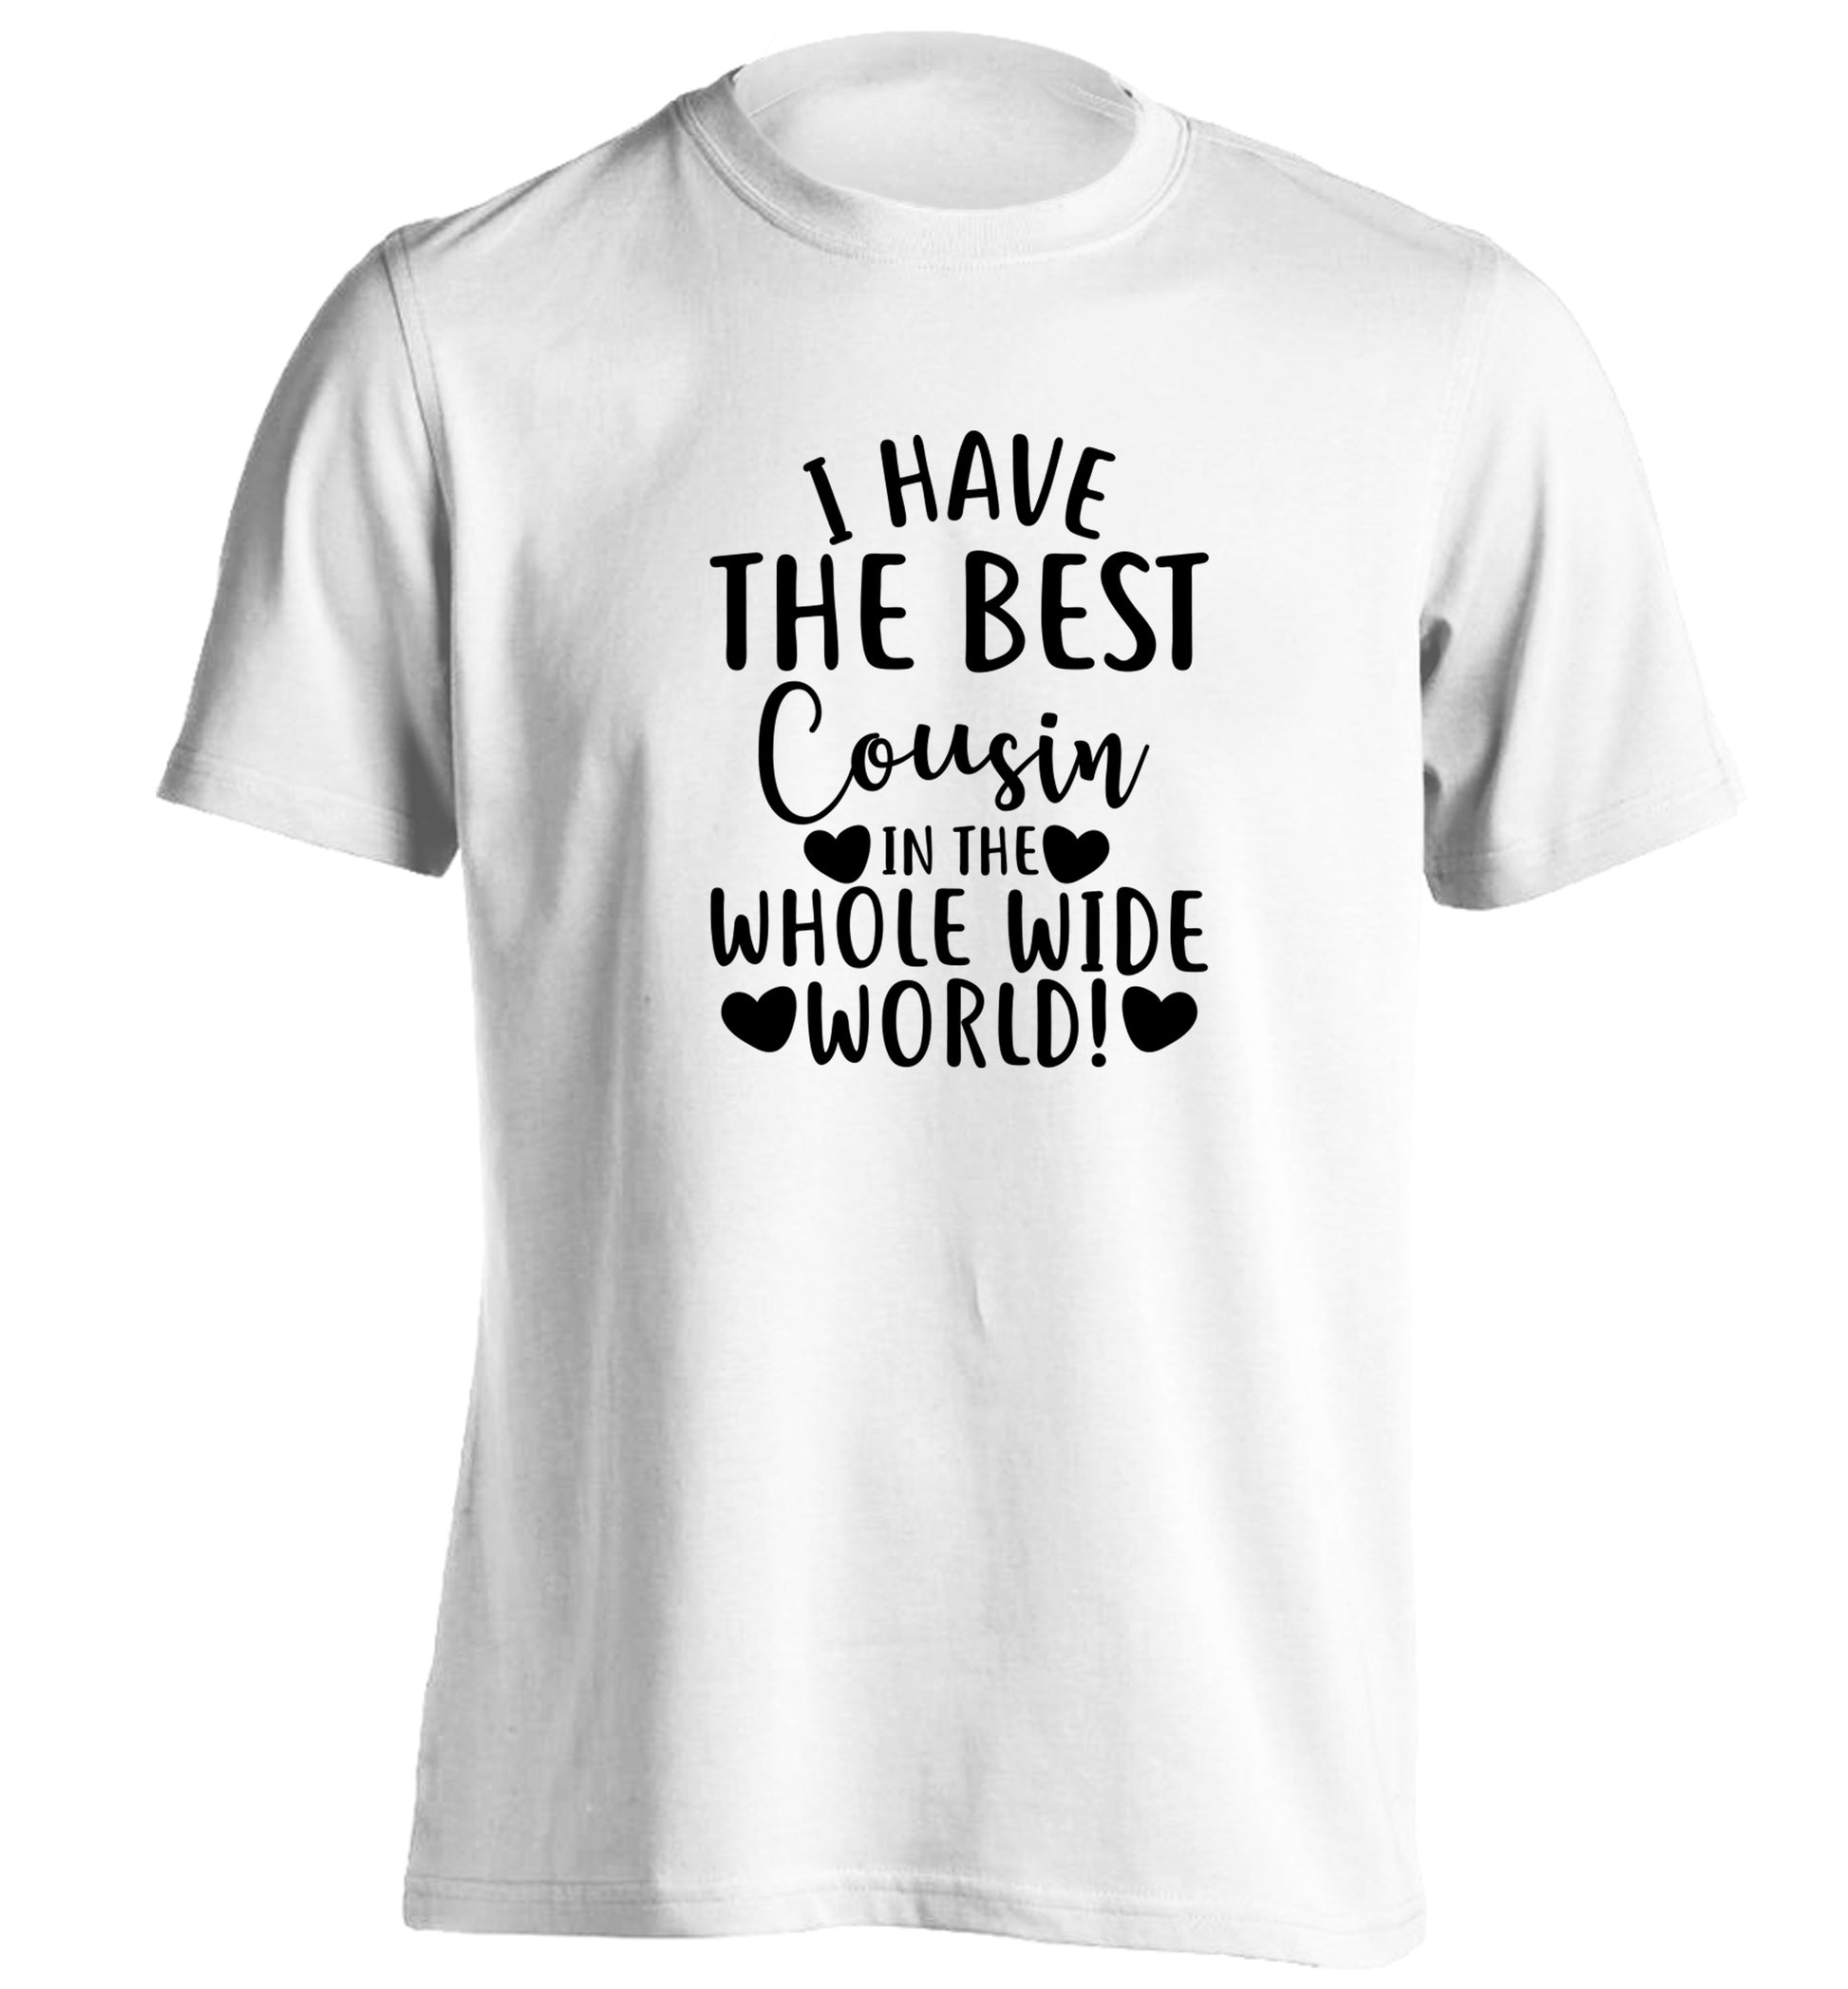 I have the best cousin in the whole wide world! adults unisex white Tshirt 2XL